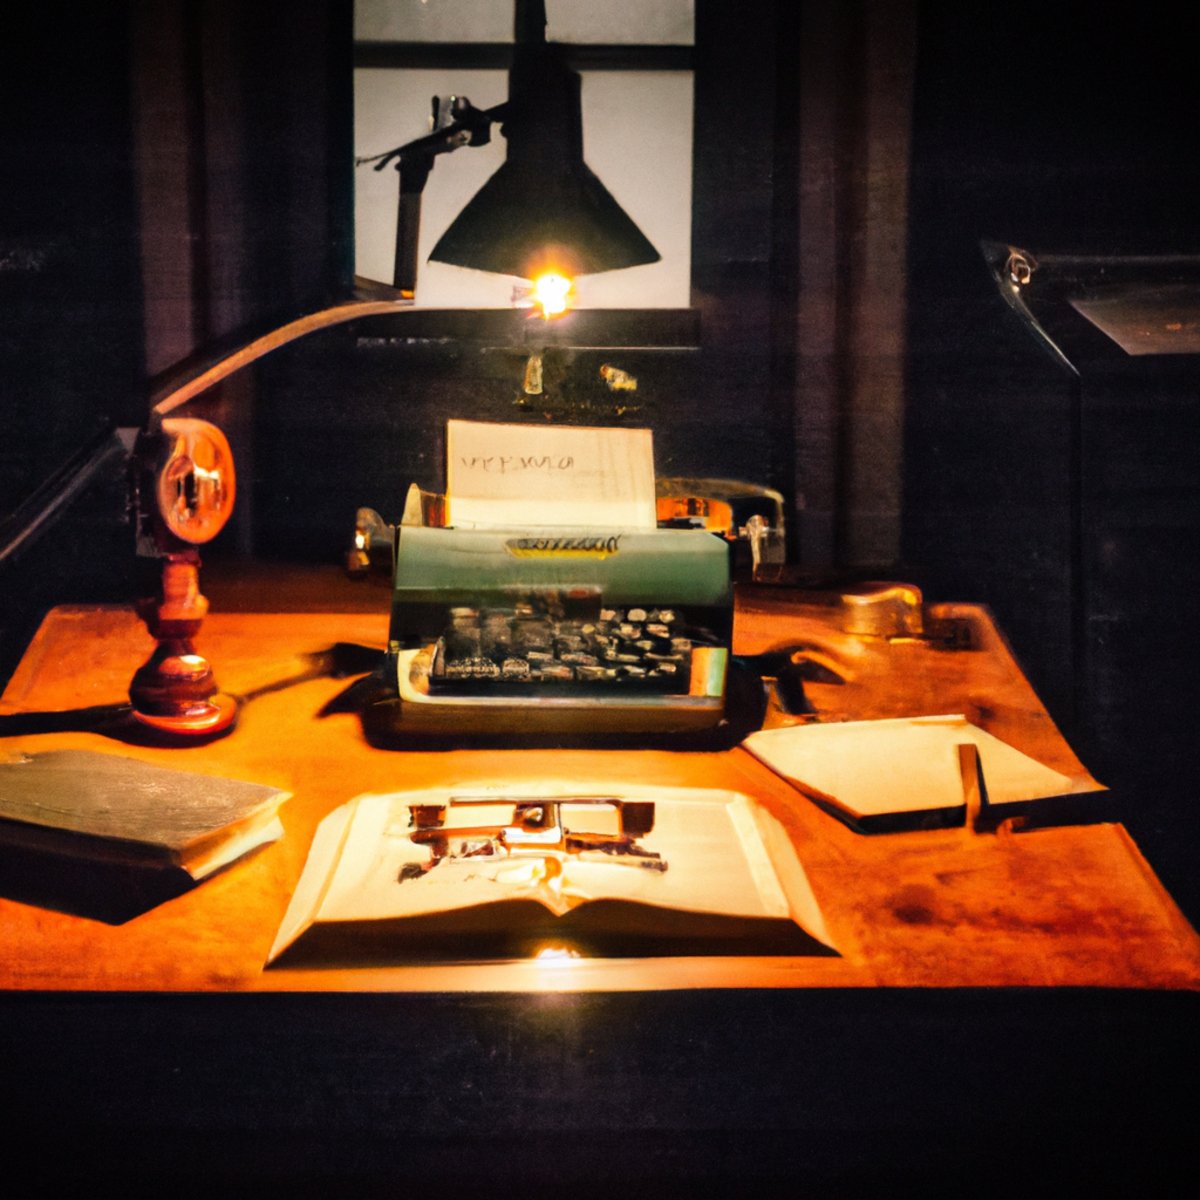 Dimly lit room with a solitary lamp, open book, spectacles, vintage typewriter, framed photos, worn-out armchair. Contemplative ambiance -Capgras Syndrome